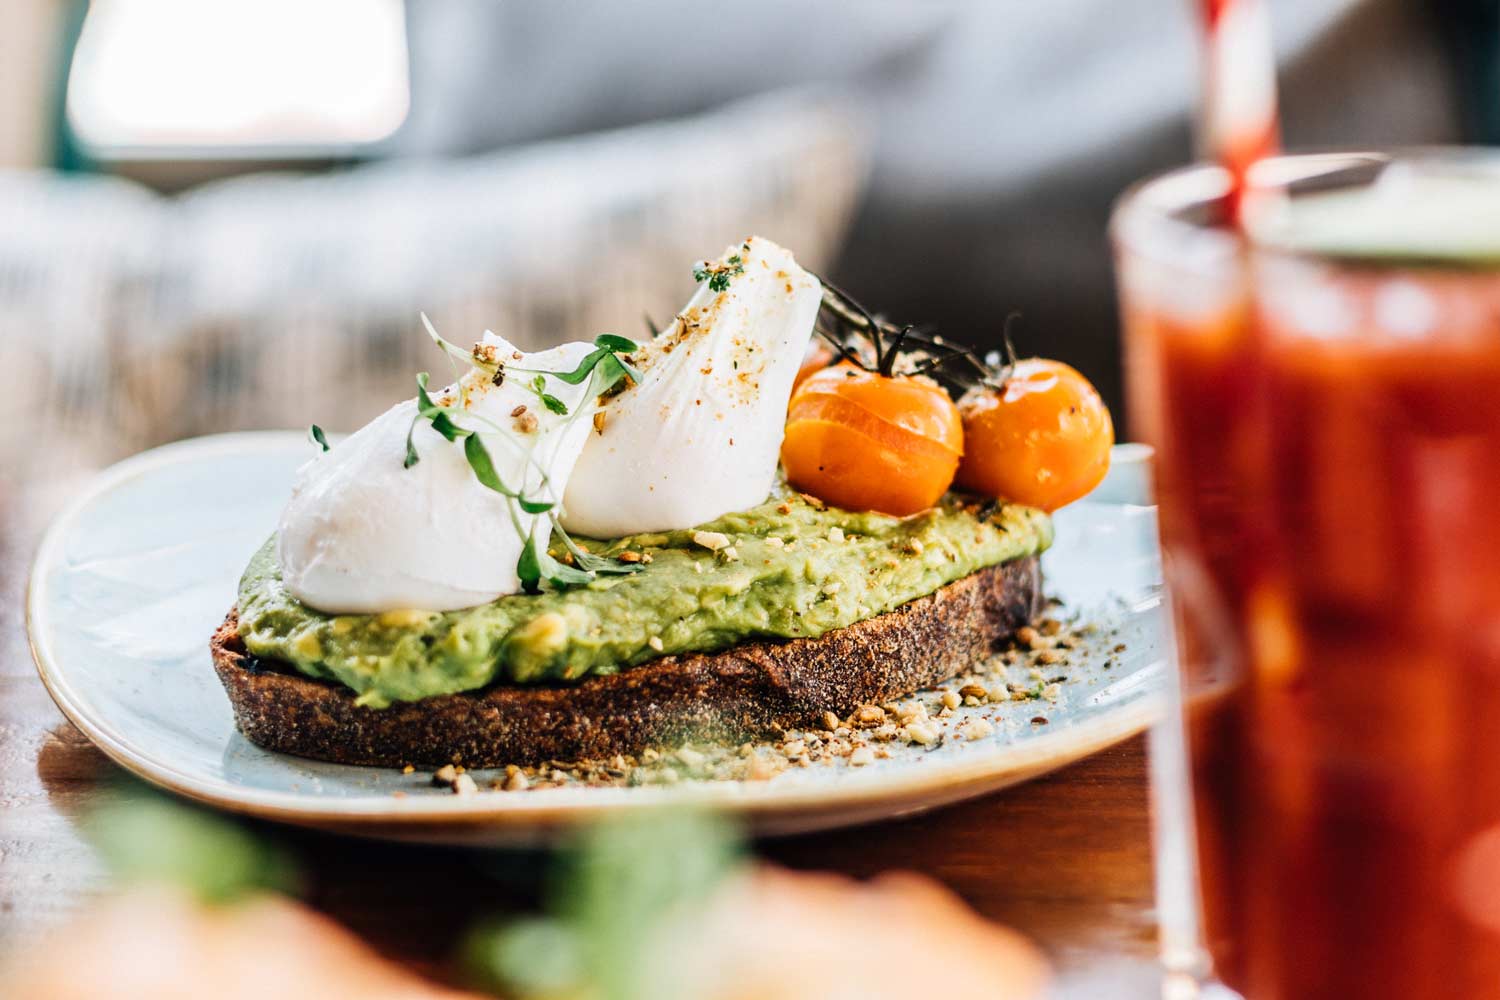 Avocado toast with poached eggs and tomatoes